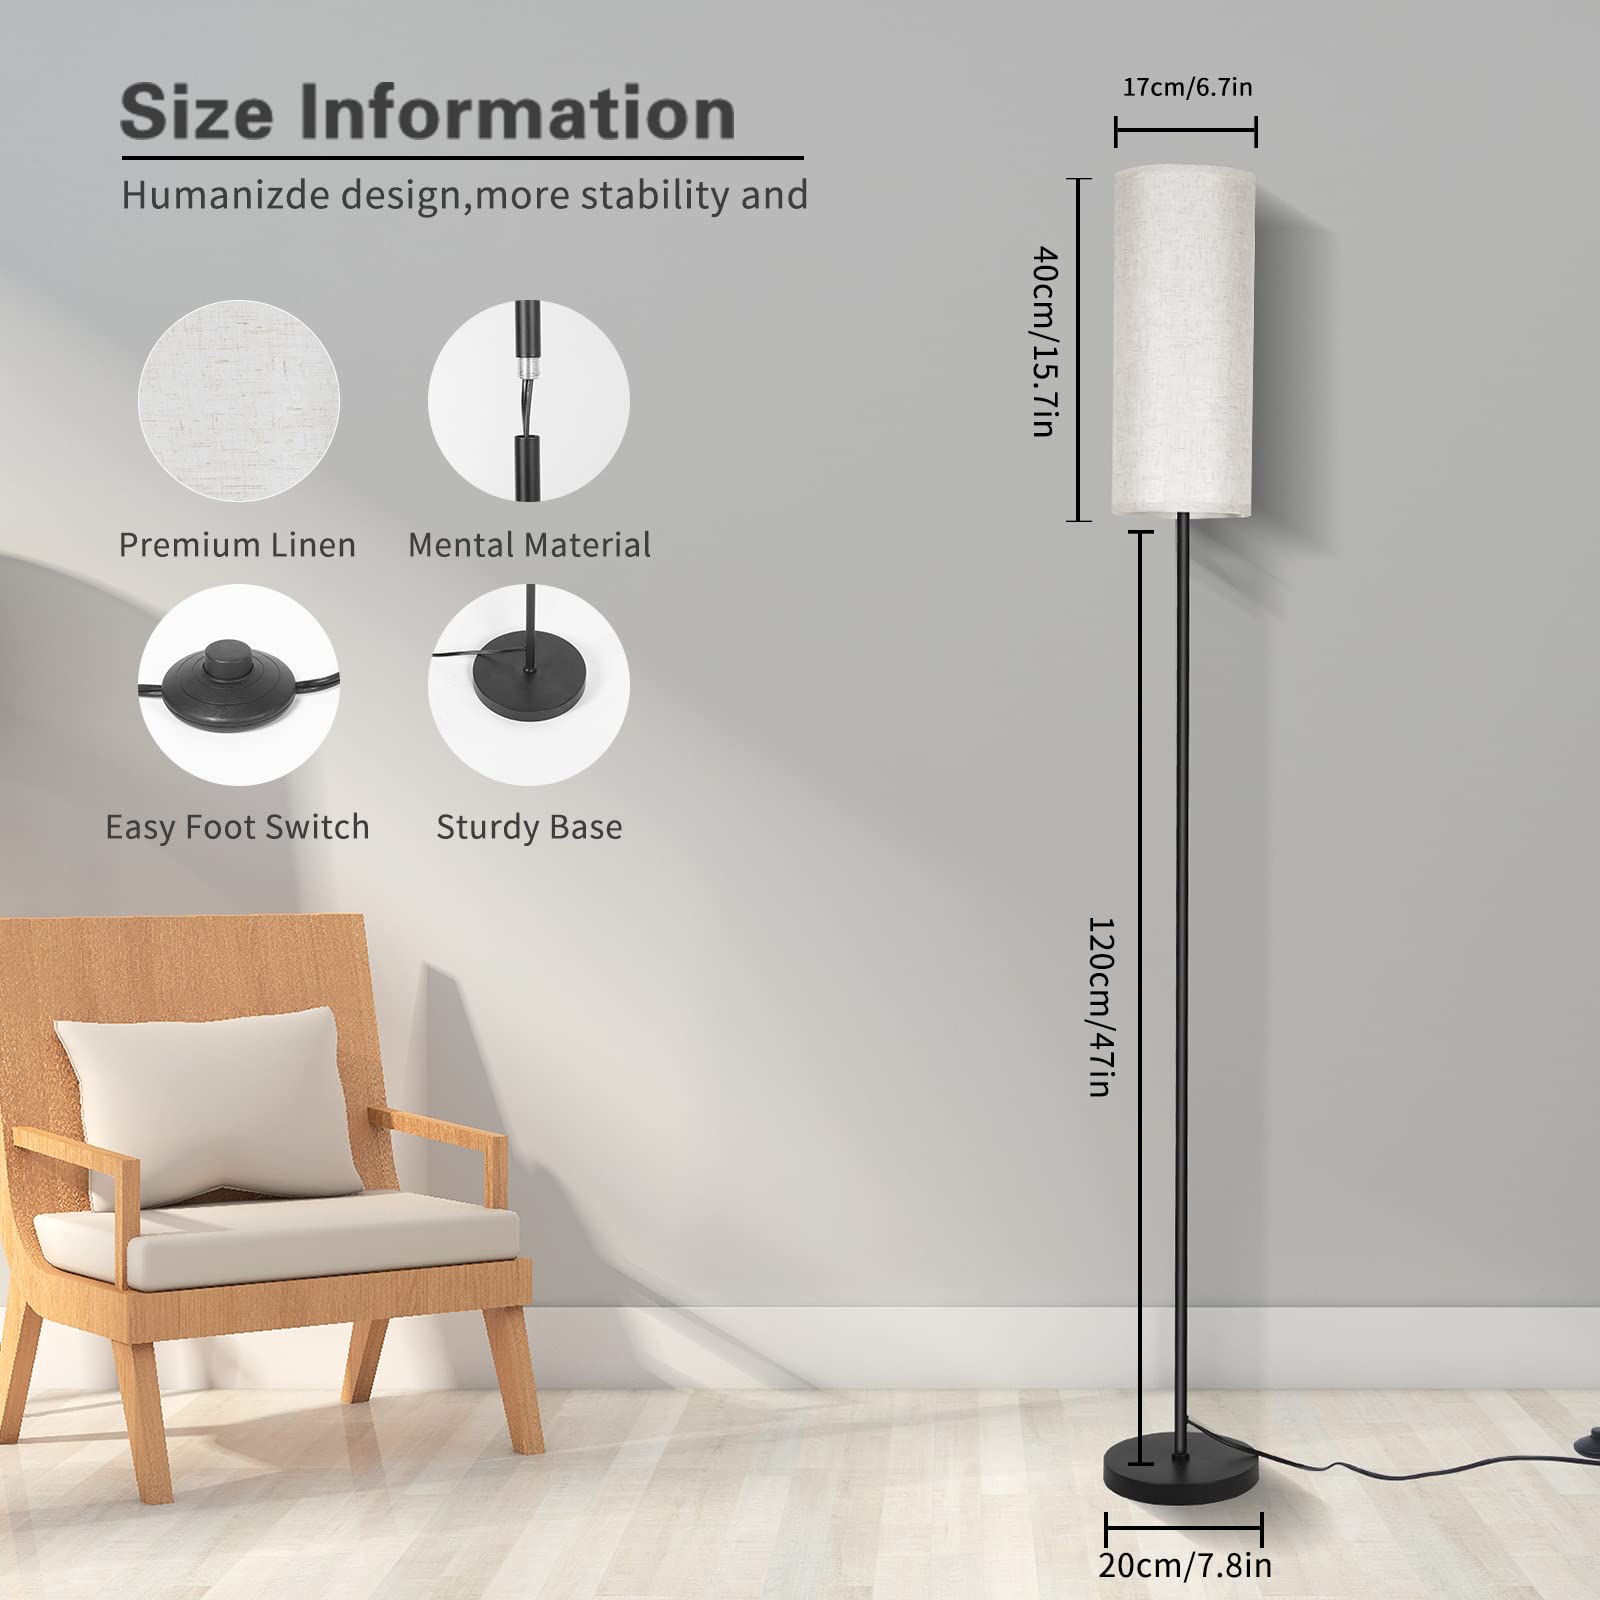 Karjoefar Floor Lamp for Living Room, Modern Floor Lamp with Remote Control, Stepless Dimmable 12W Bulb Included, Standing Lamp Tall Lamps for Living Room Bedroom